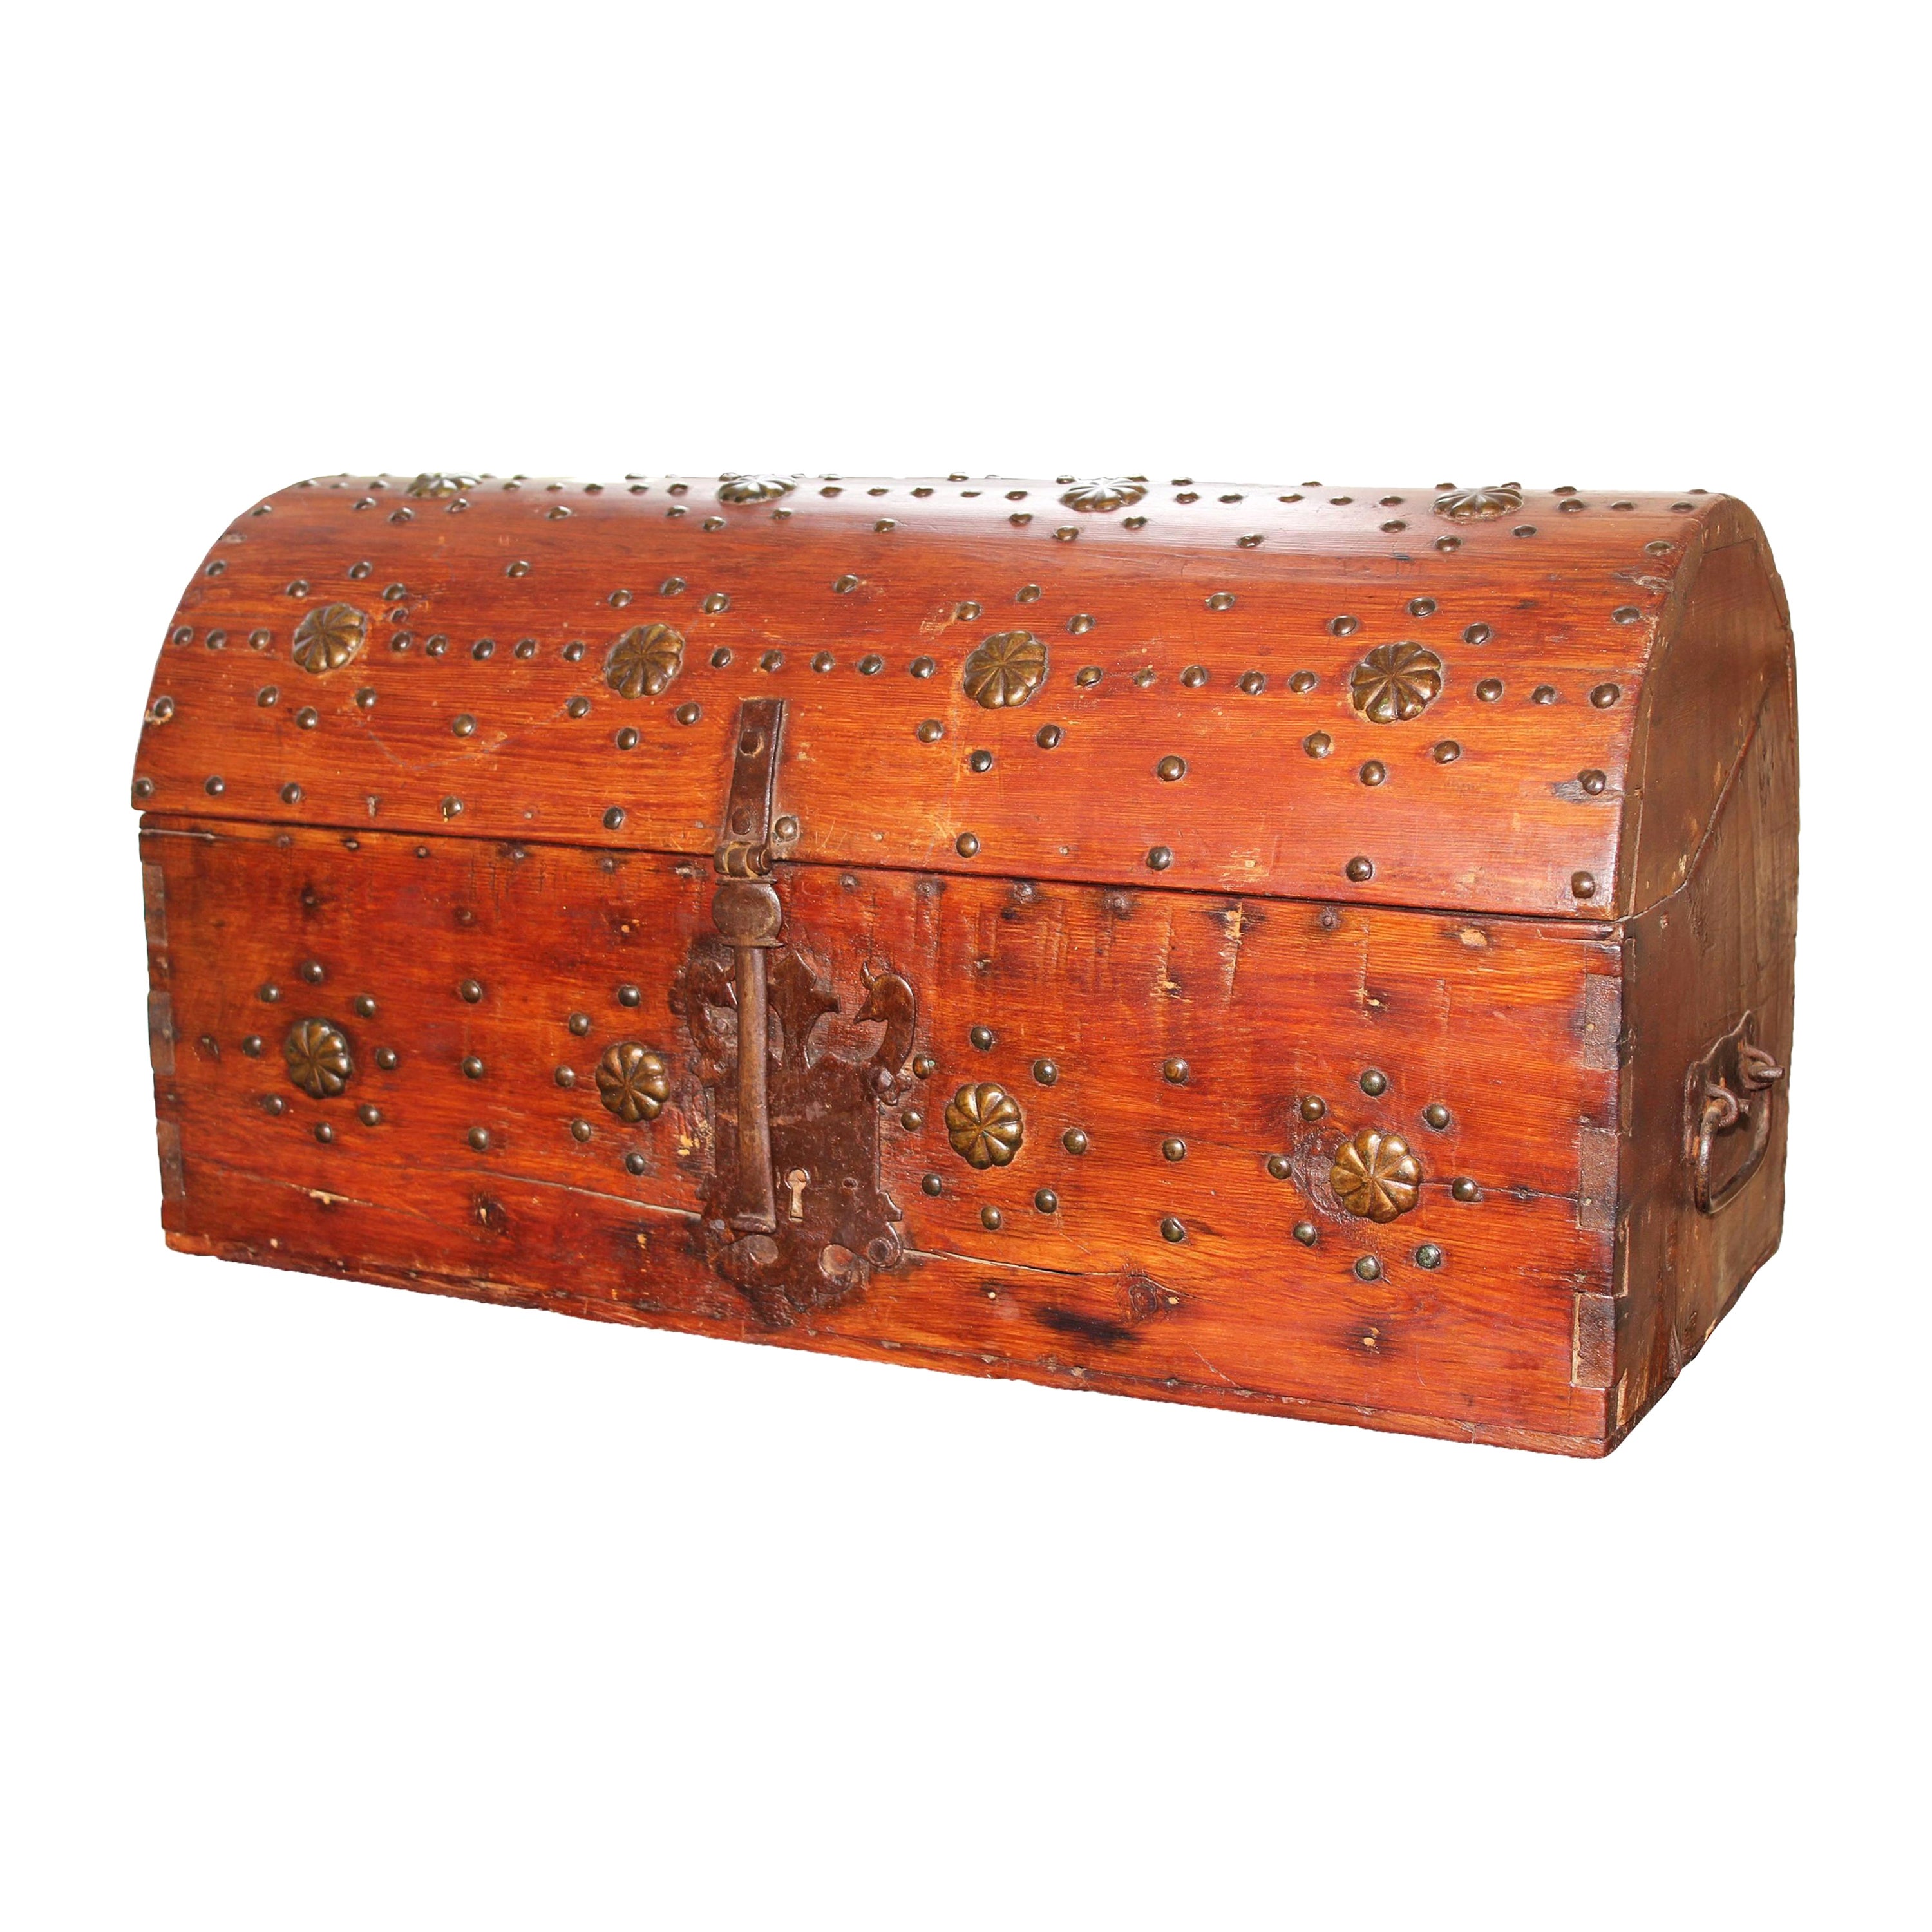 1700s, Spanish Wooden Chest with Iron Decorations